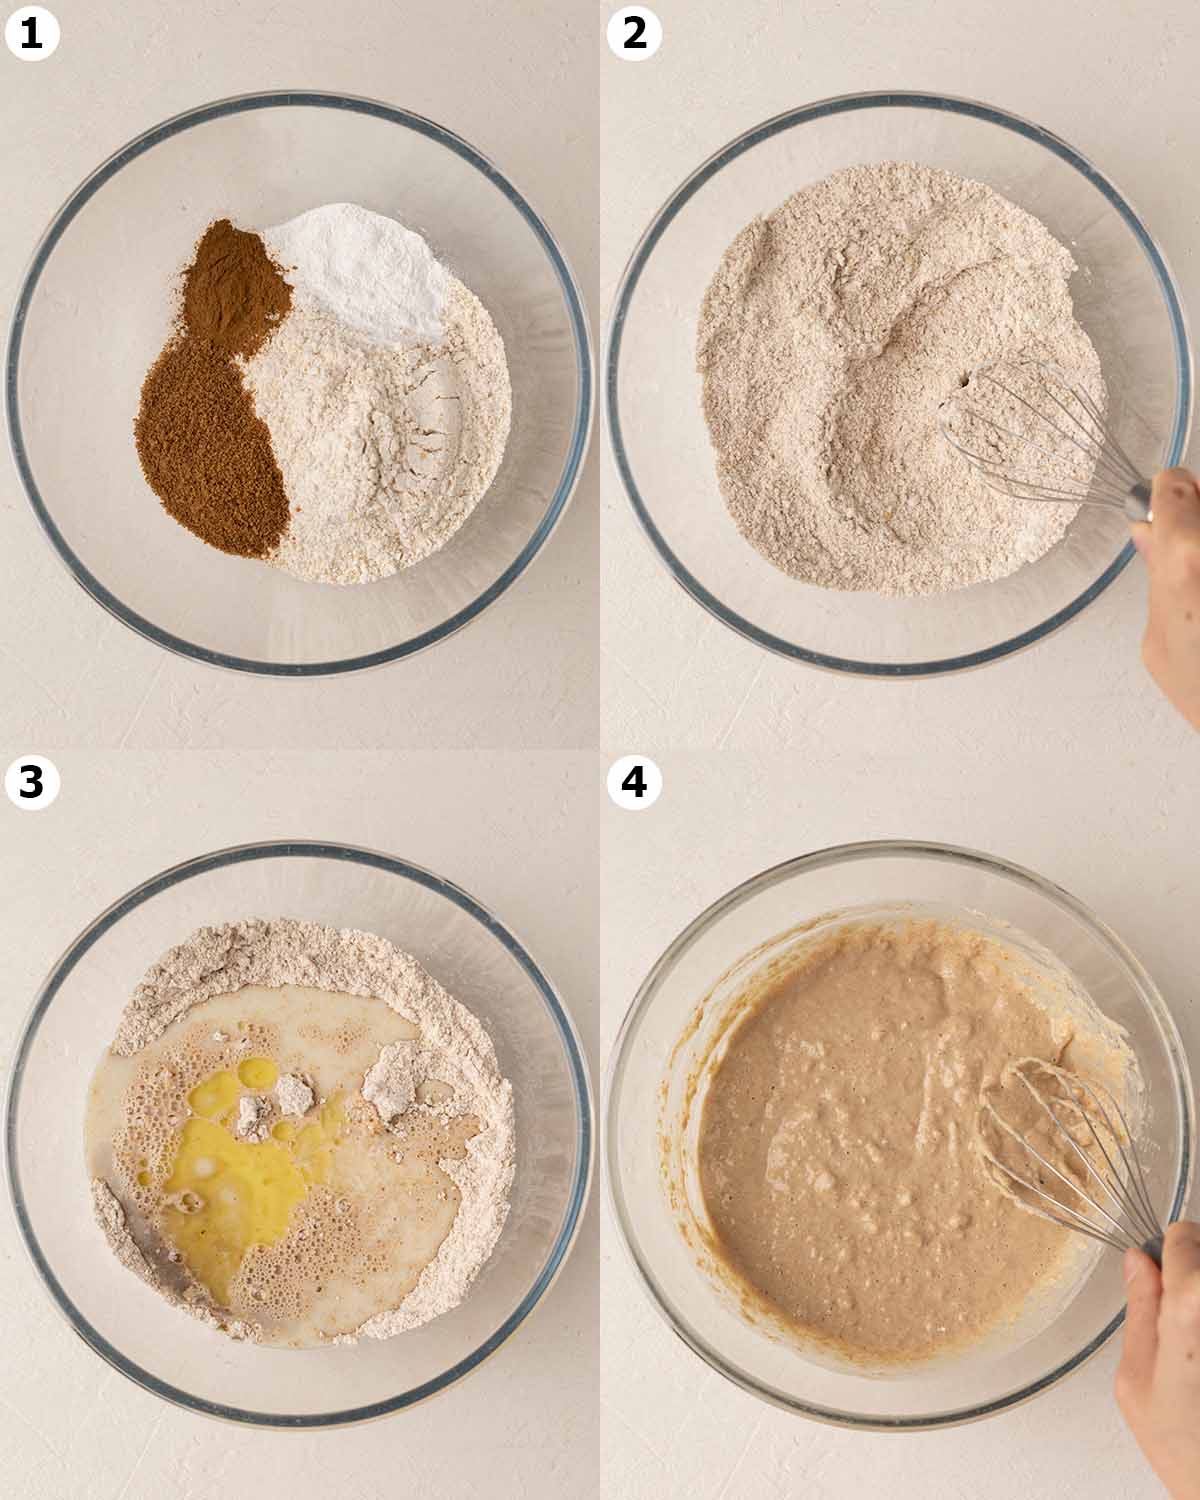 Four image collage showing how to make batter for pancakes.